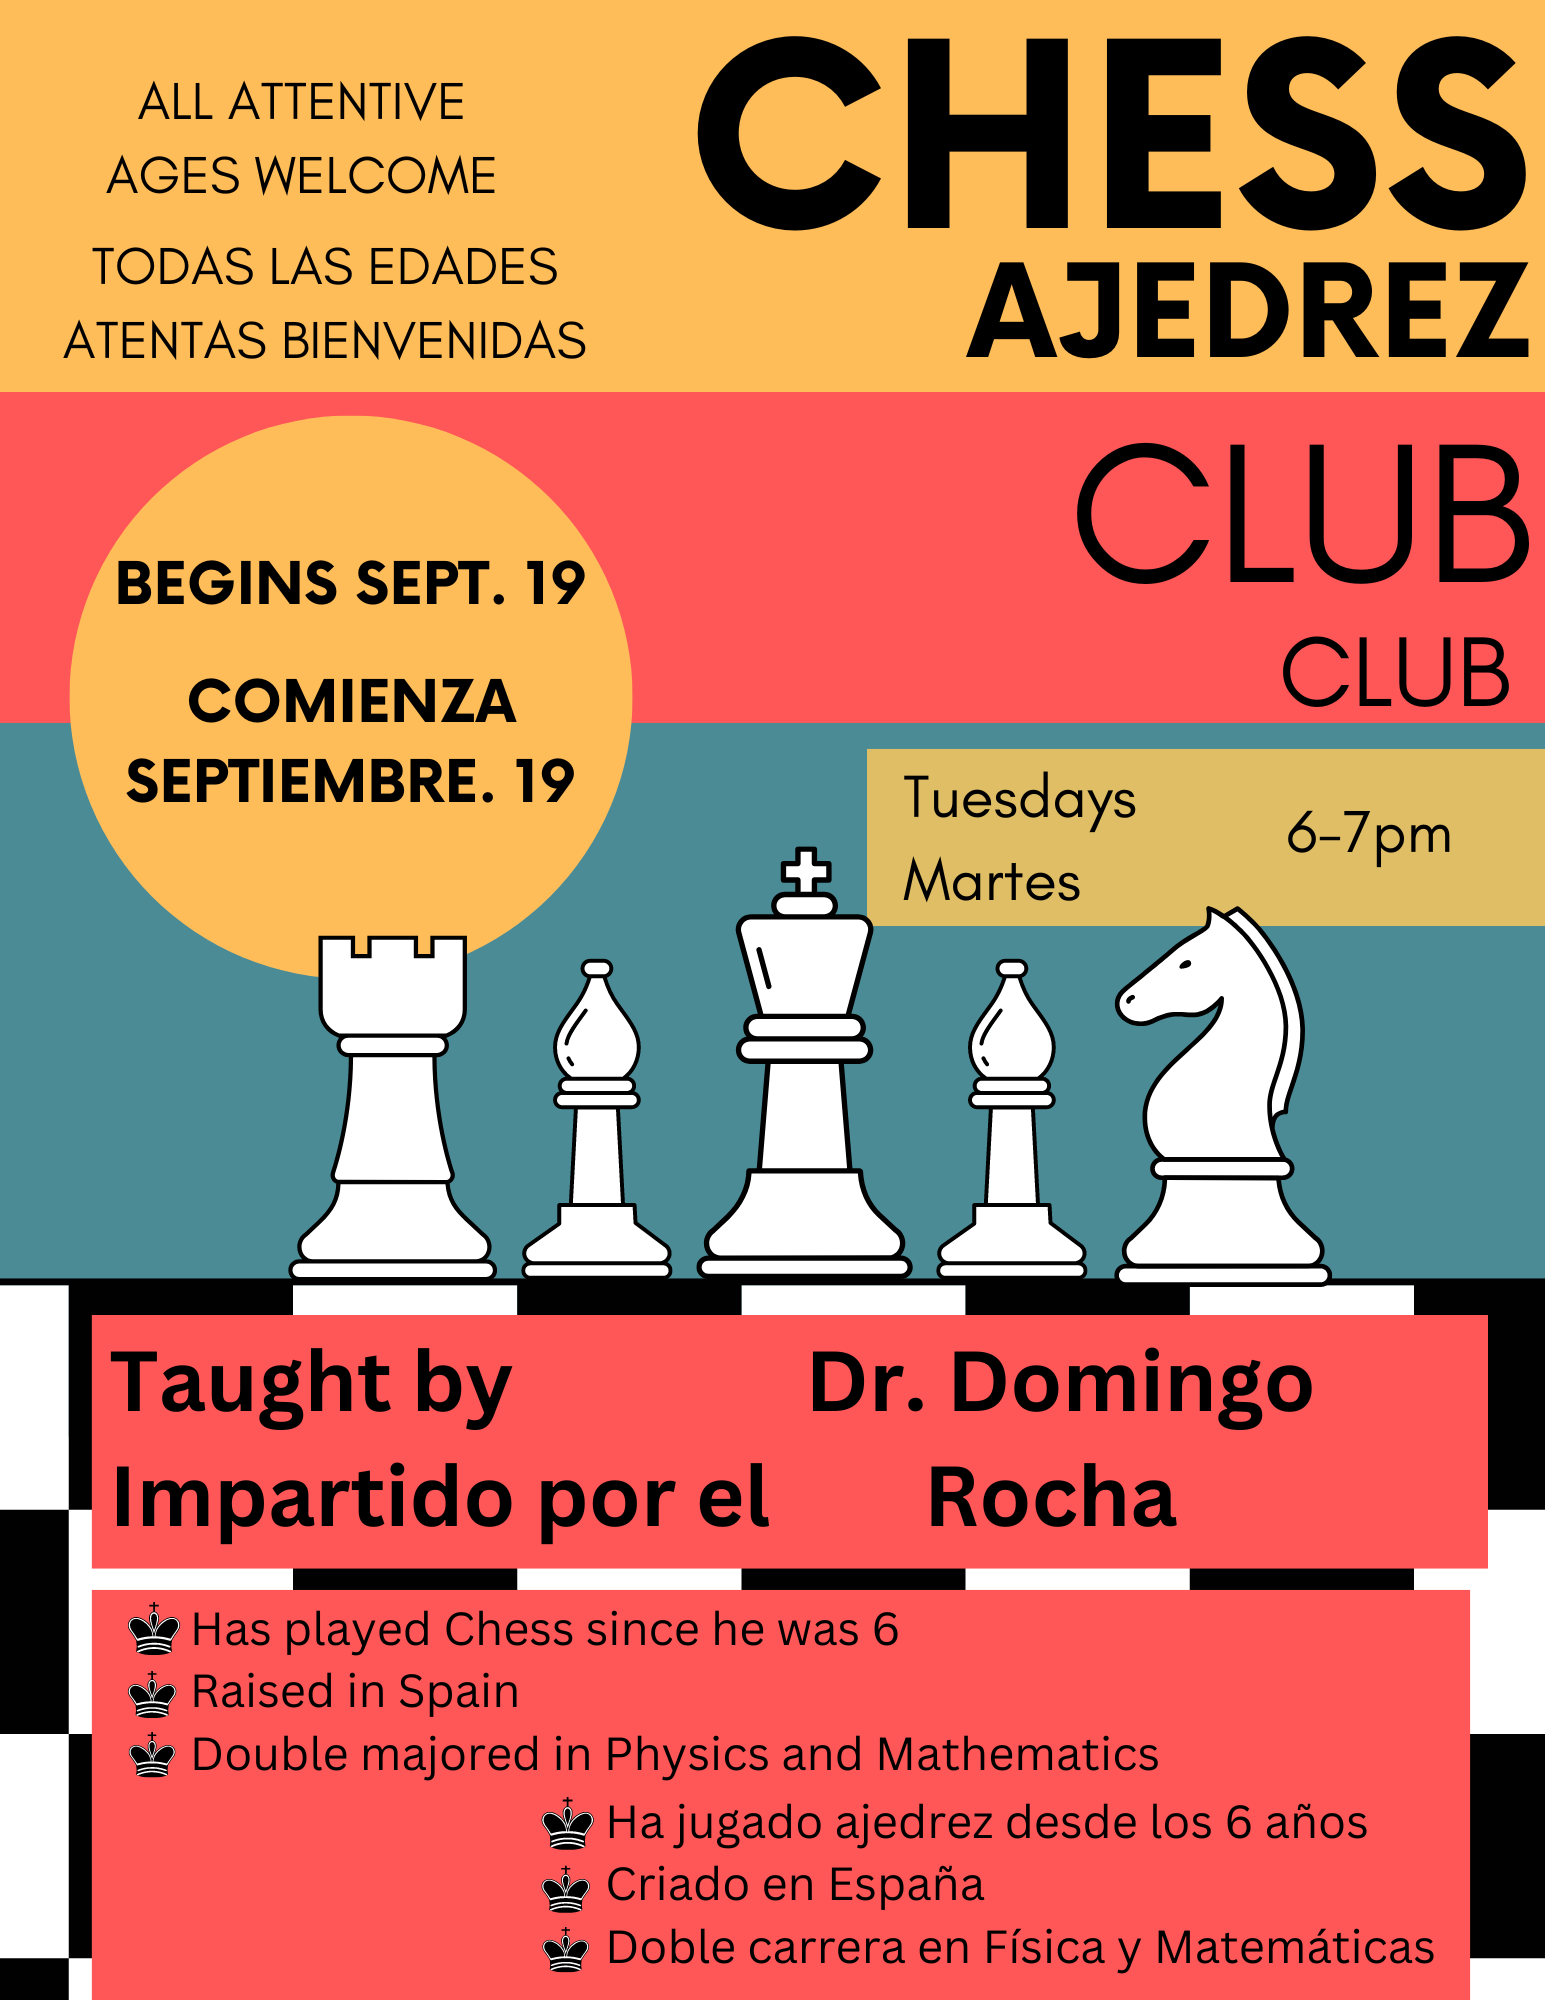 <h1 class="tribe-events-single-event-title">Chess Club</h1>